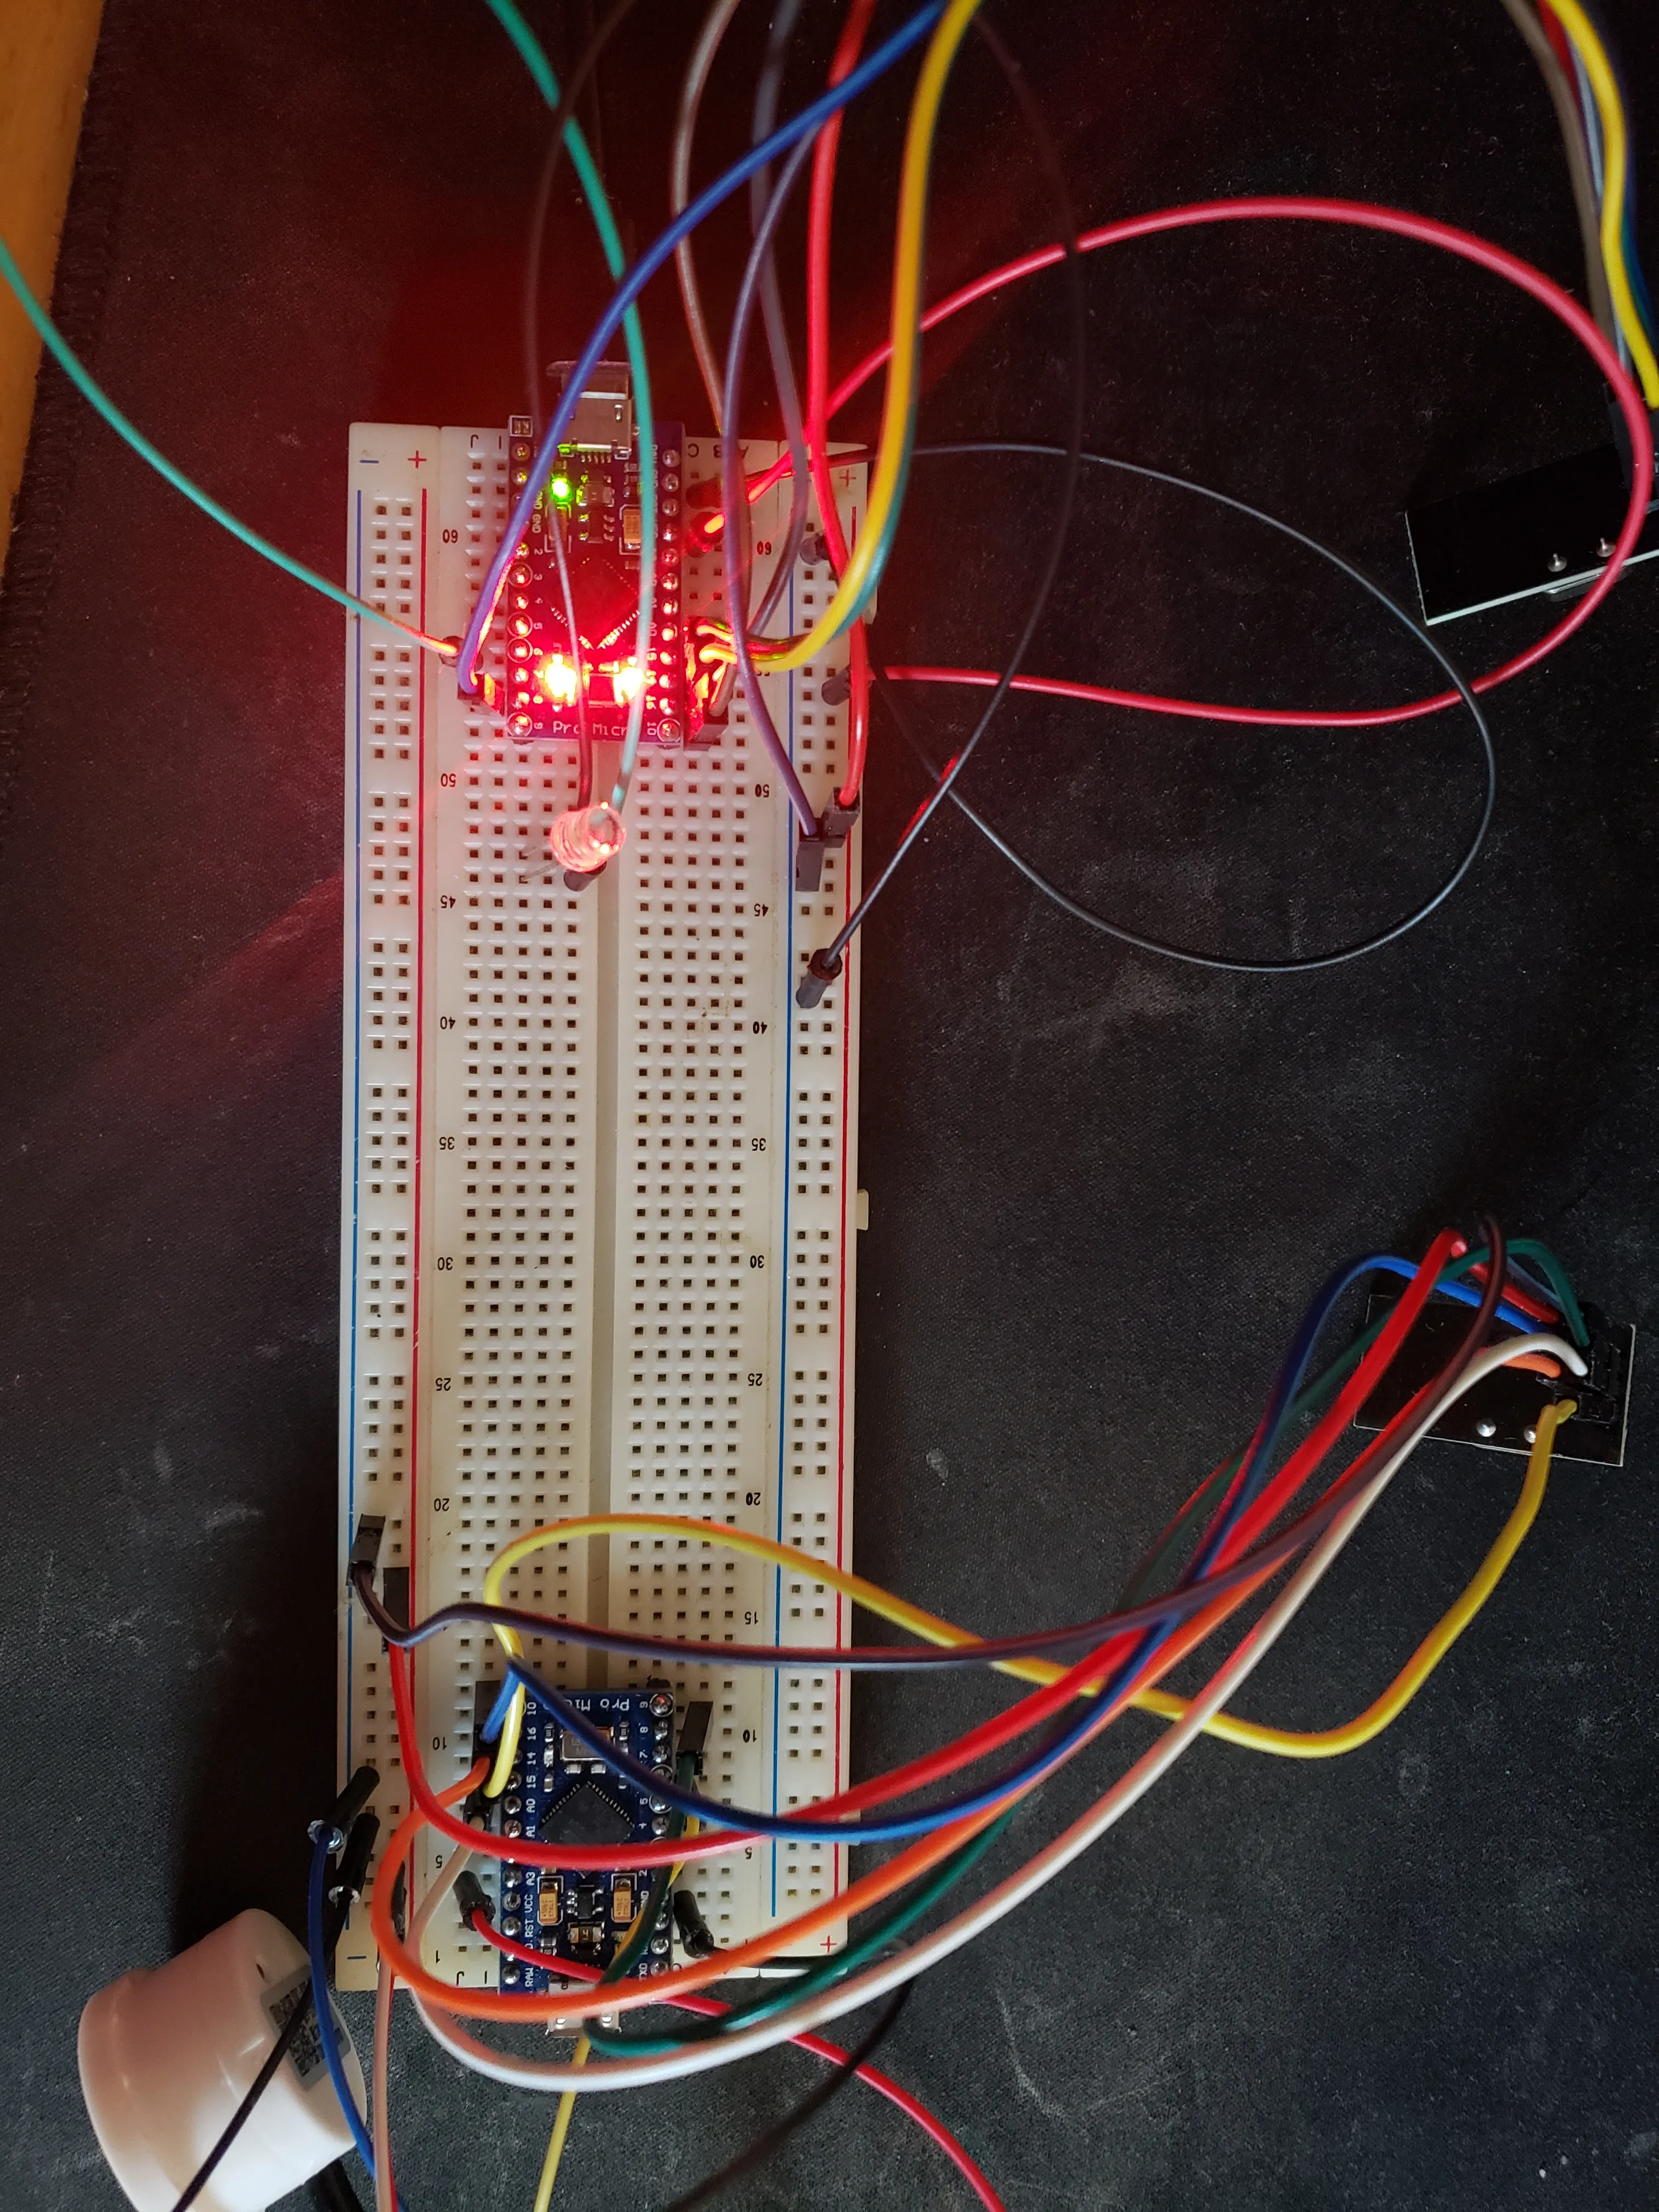 2 separate Arduino micros on a single breadboard with each connected to a NRF24L01 module. One micro is wired to the non contact fluid sensor, the other wired to an LED